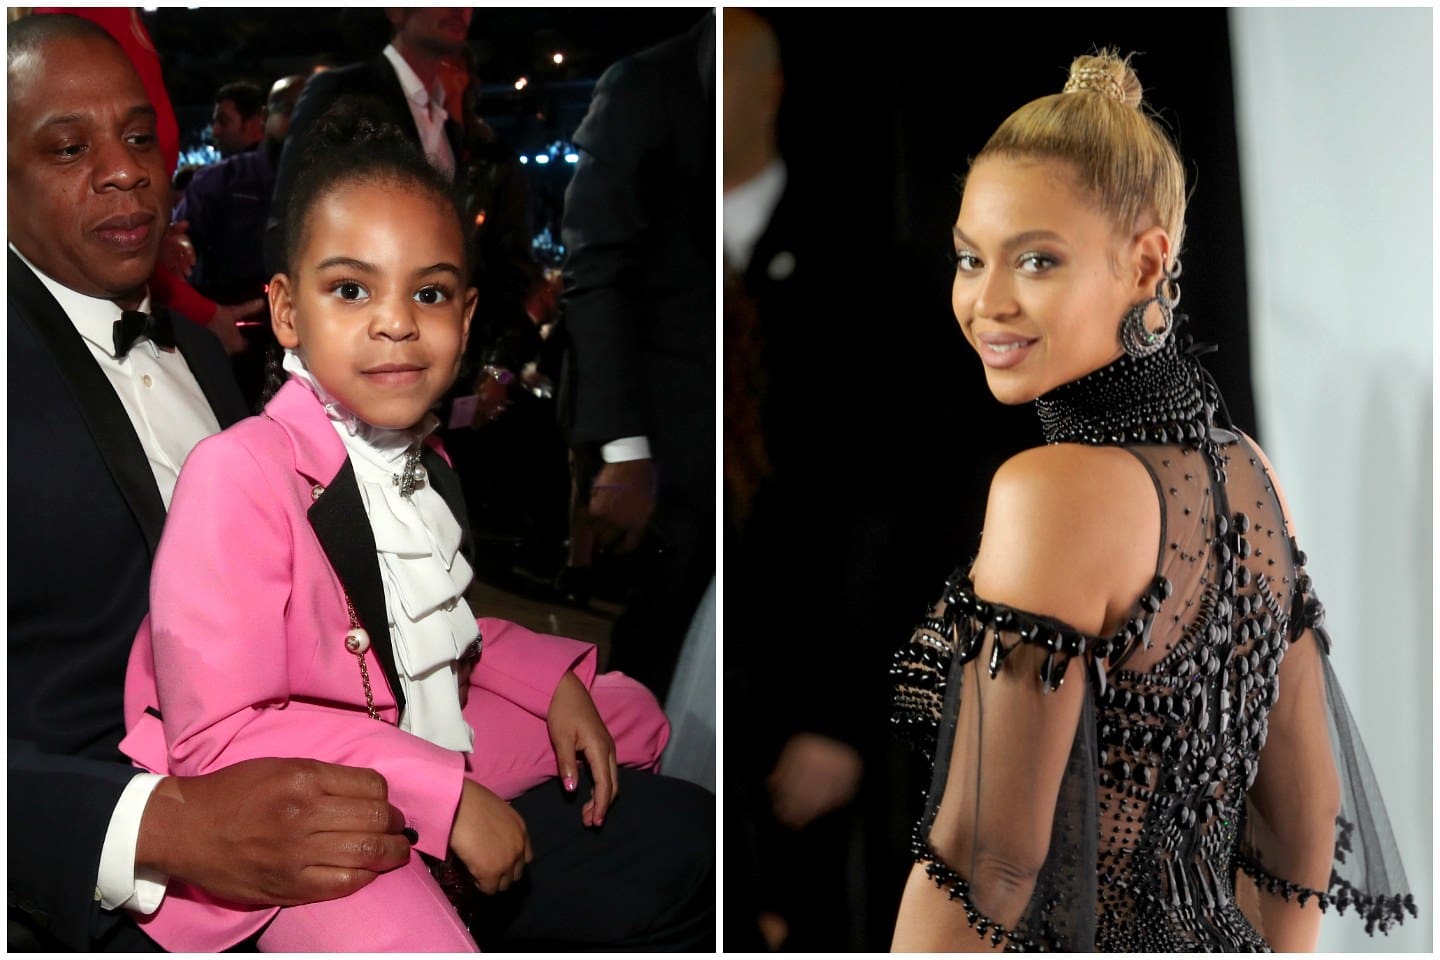 Beyonce Shocked By How Similar She And Daughter Blue Ivy Look In Side-By-Side Pictures ...1440 x 960